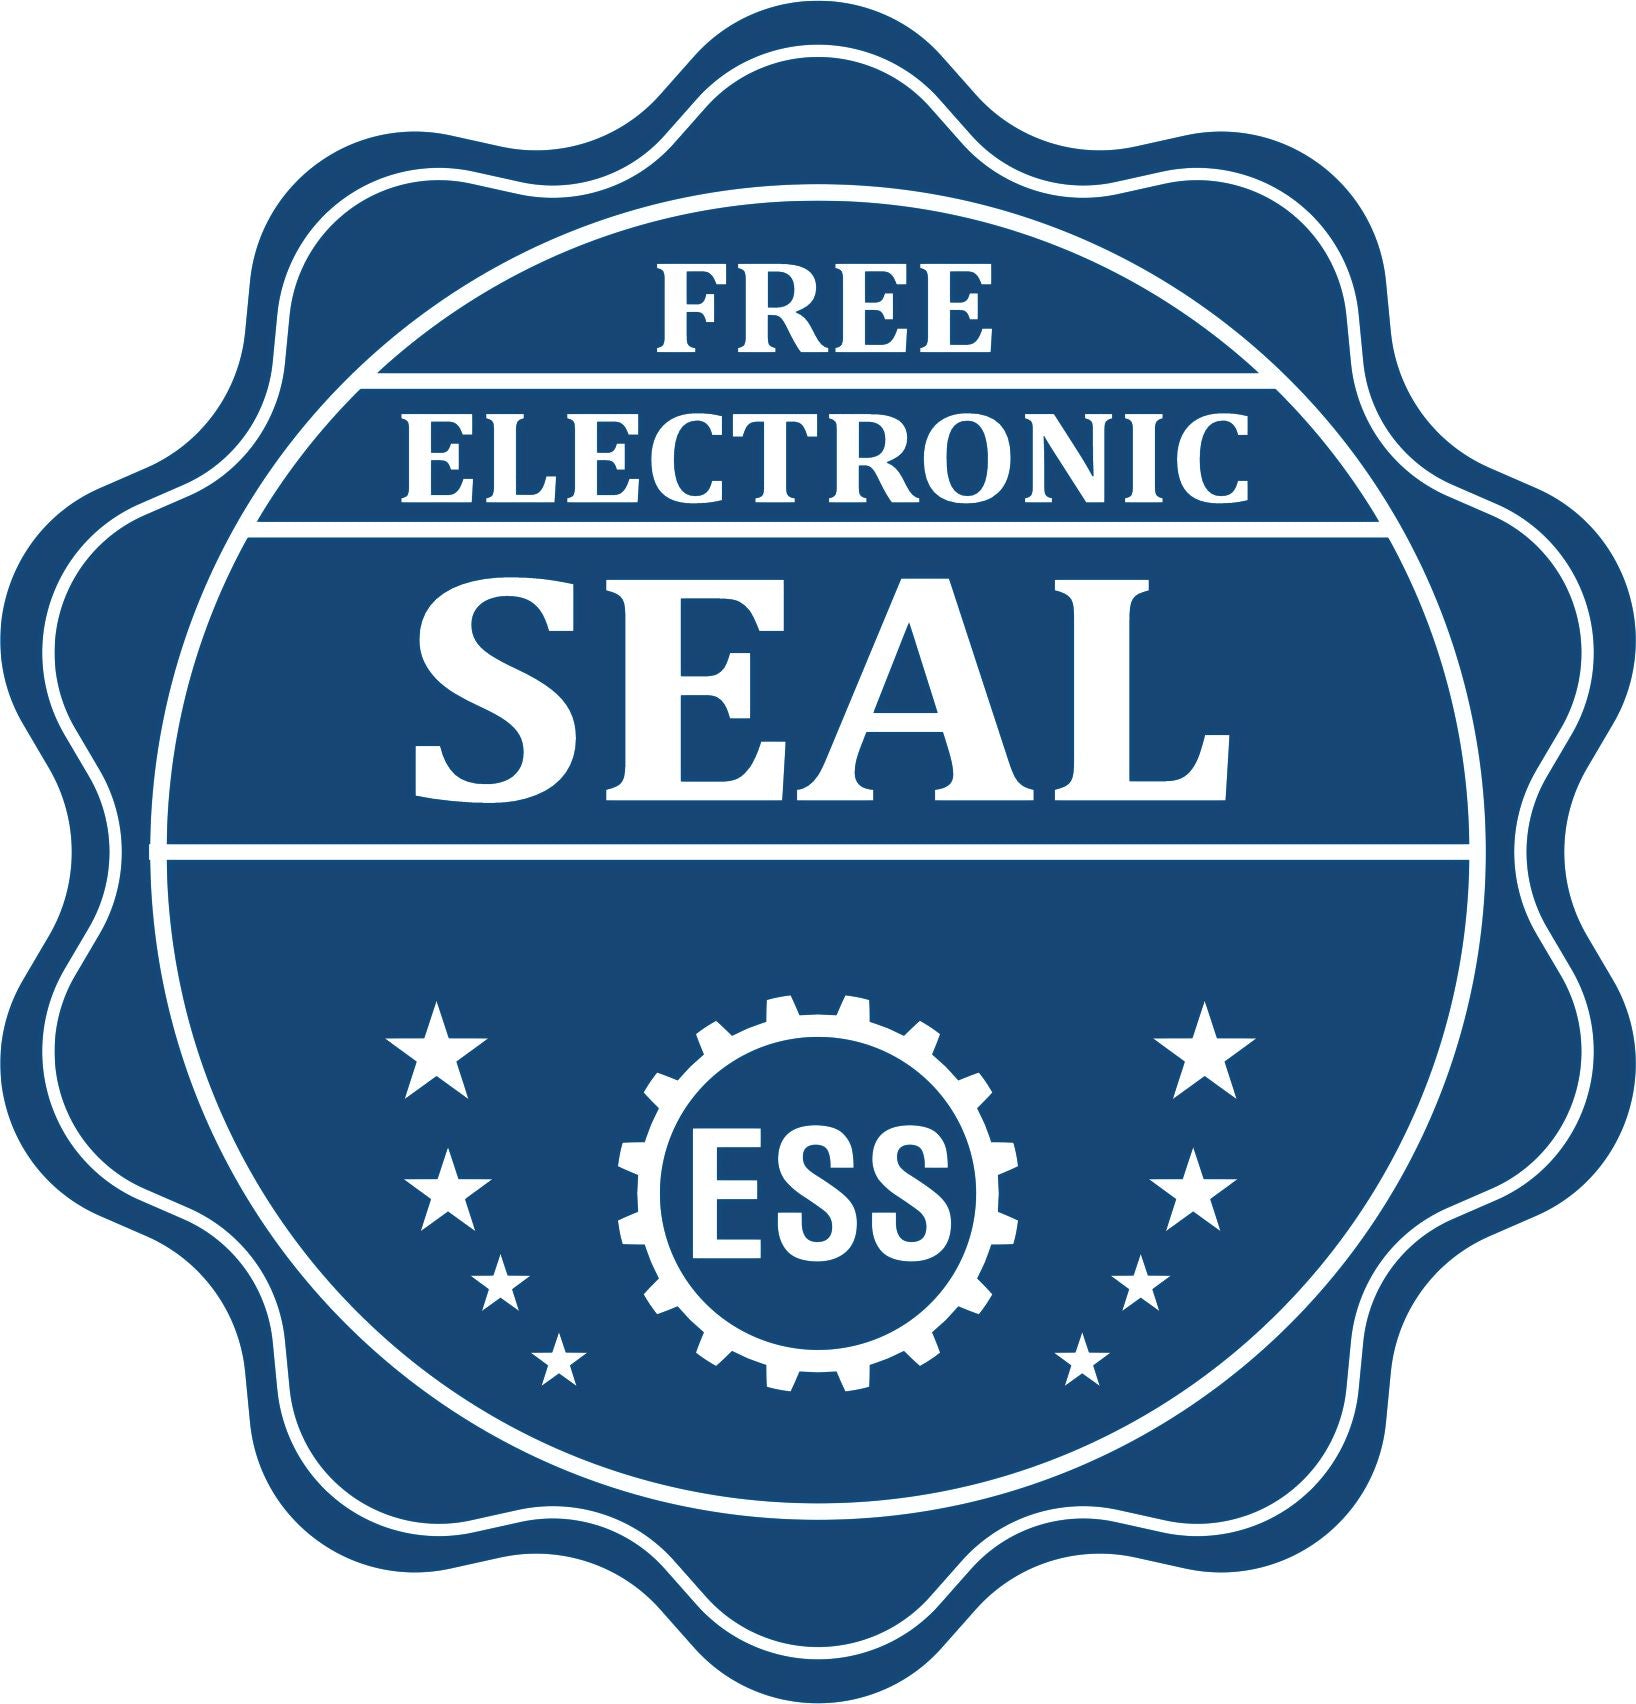 A badge showing a free electronic seal for the Gift Hawaii Architect Seal with stars and the ESS gear on the emblem.